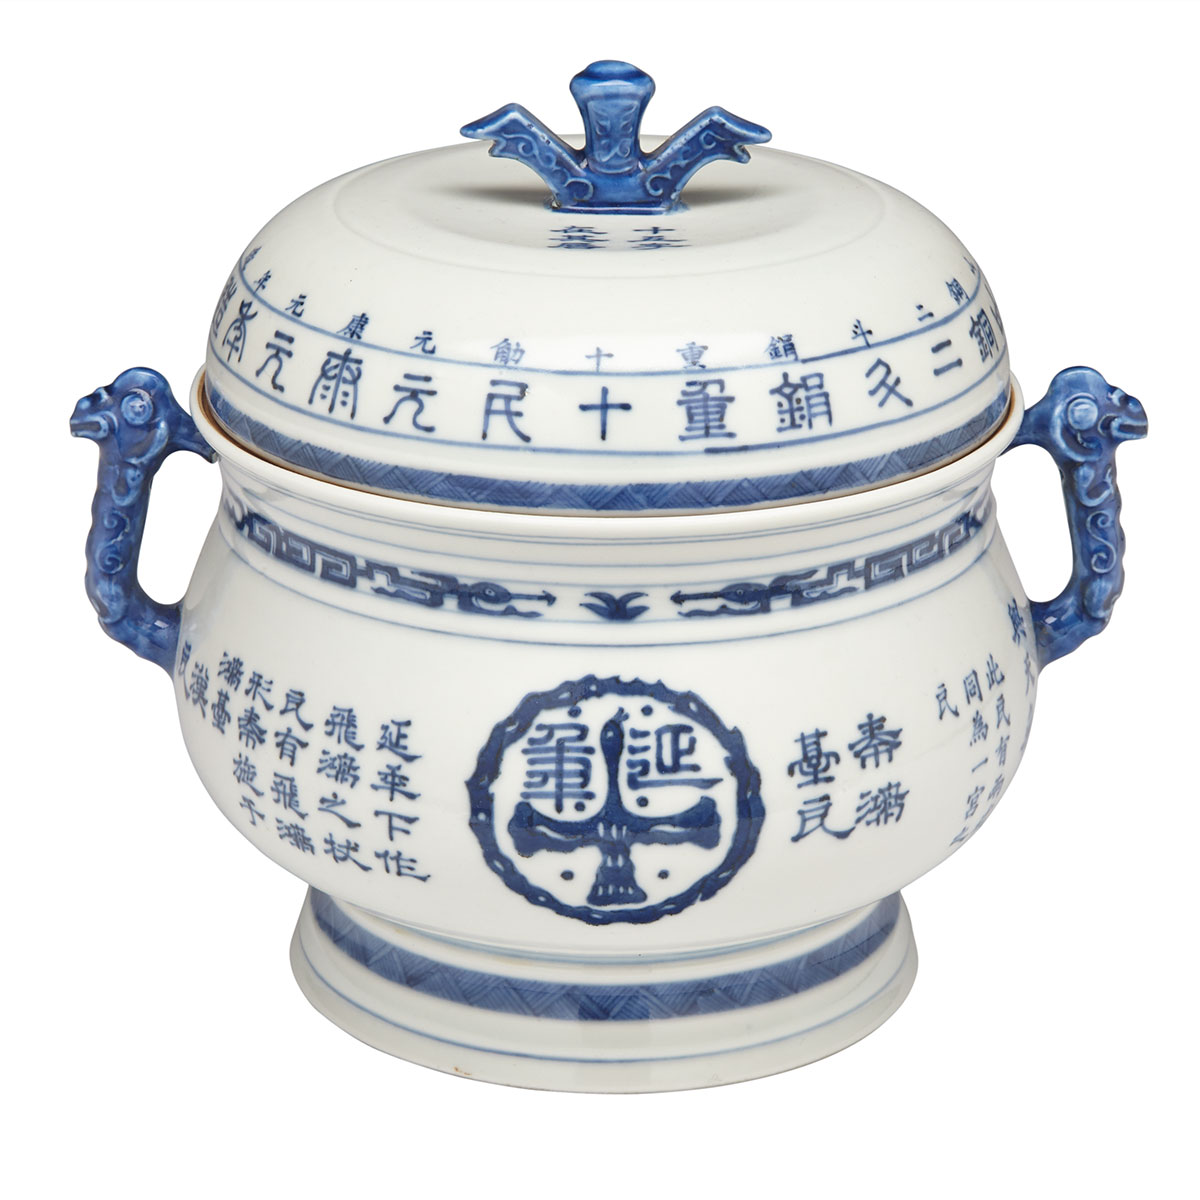 Blue and White Congee Pot and Cover, Jiangxi and Guangxu Mark